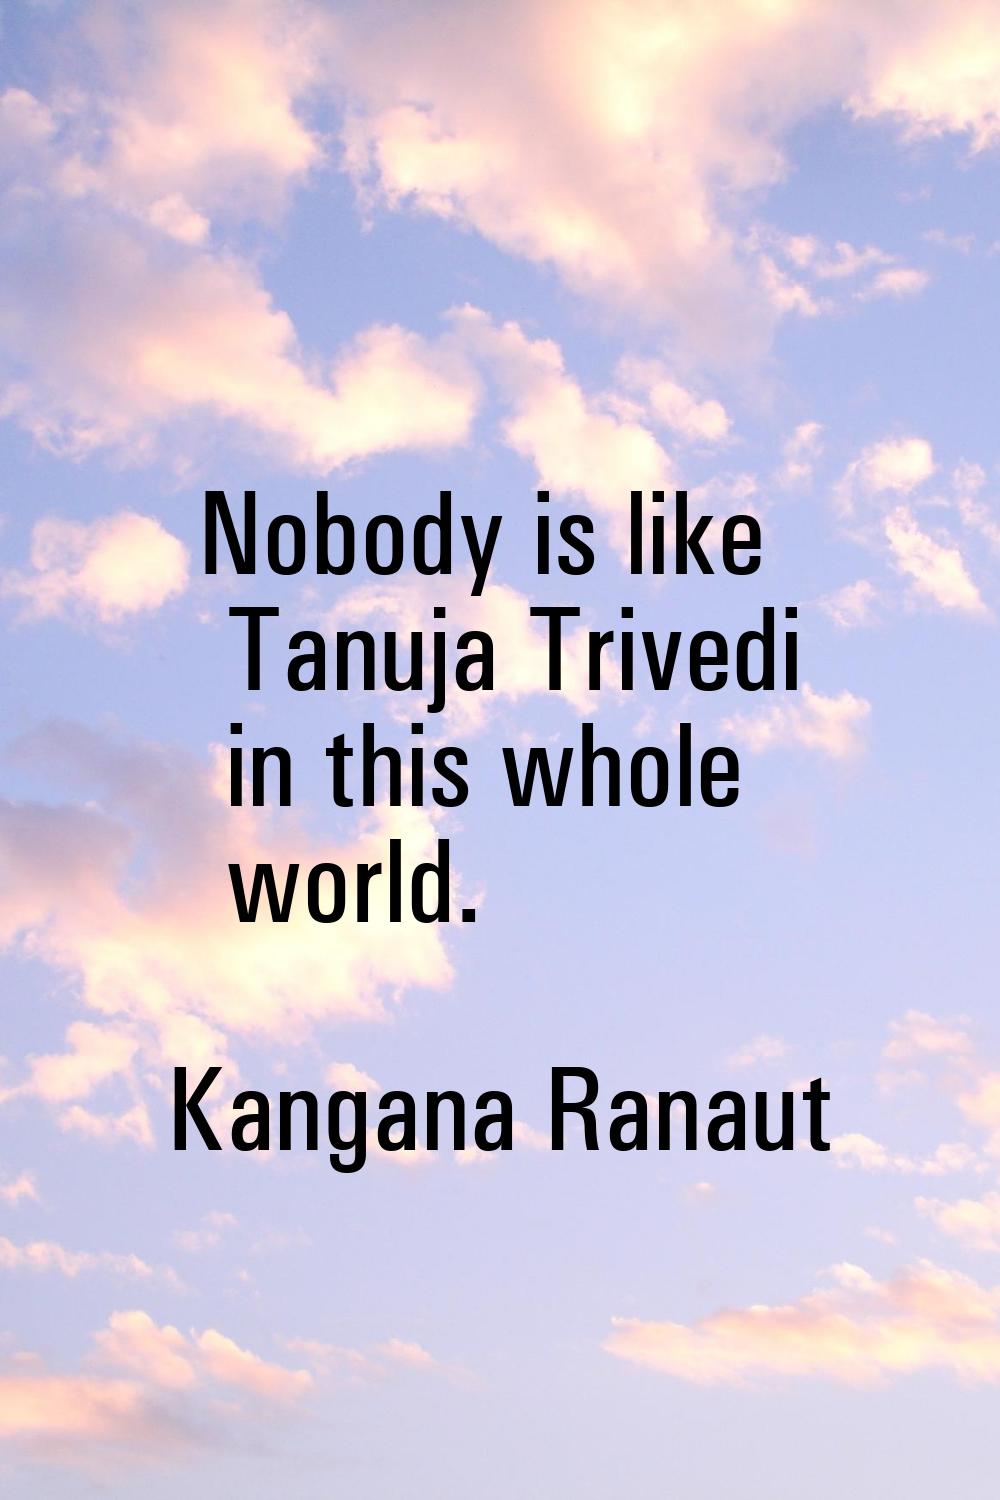 Nobody is like Tanuja Trivedi in this whole world.